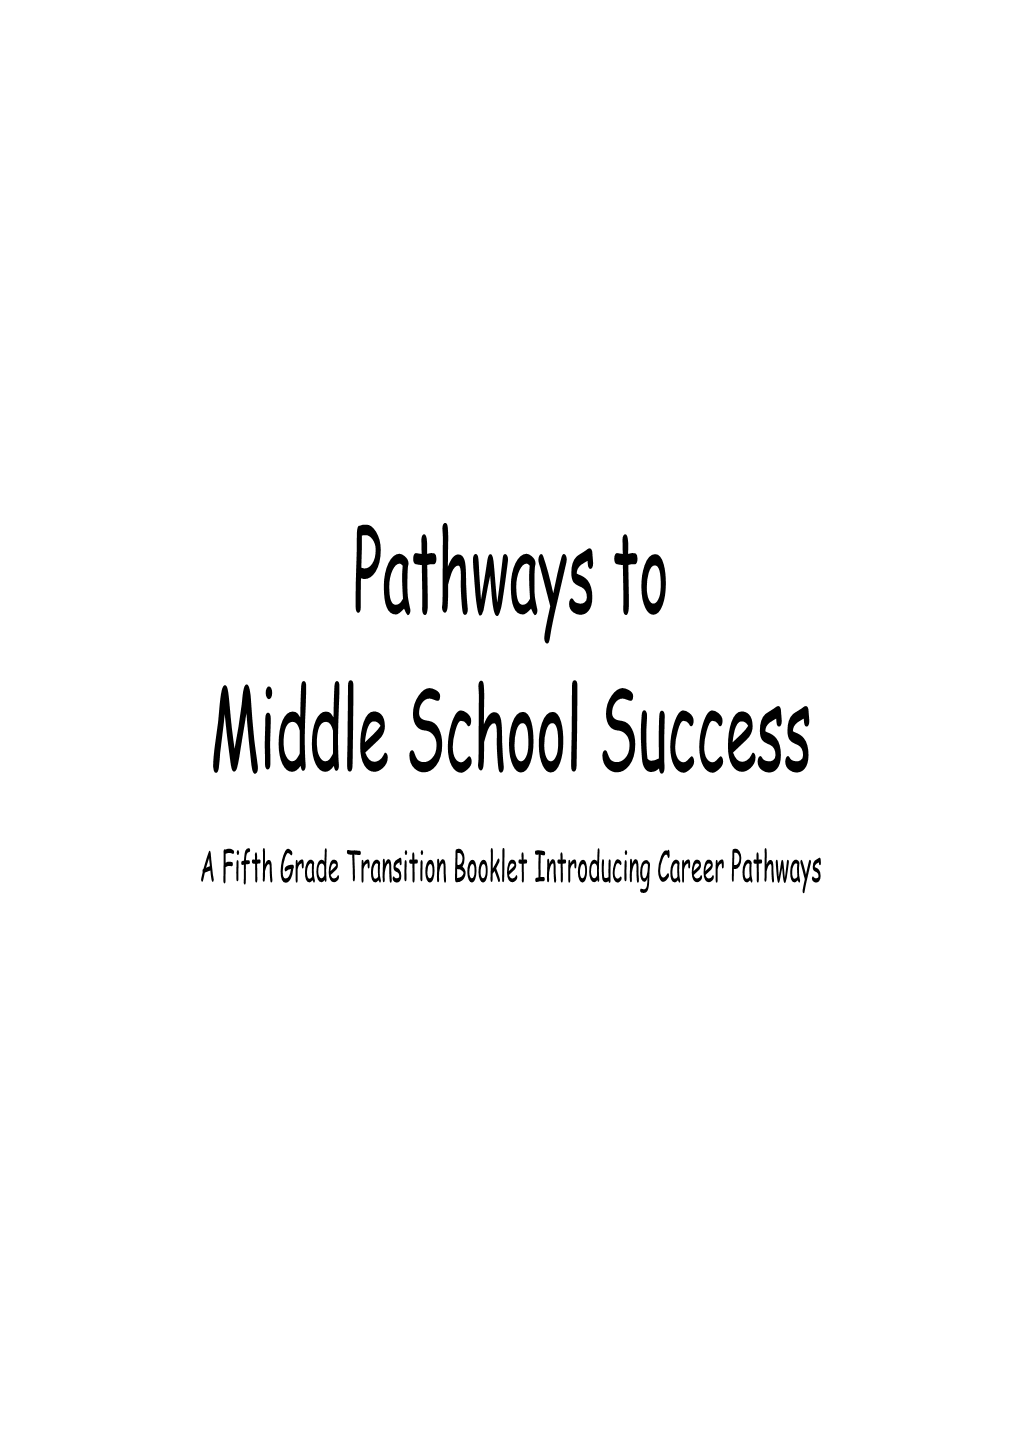 Pathways to Middle School Success Jan 2010